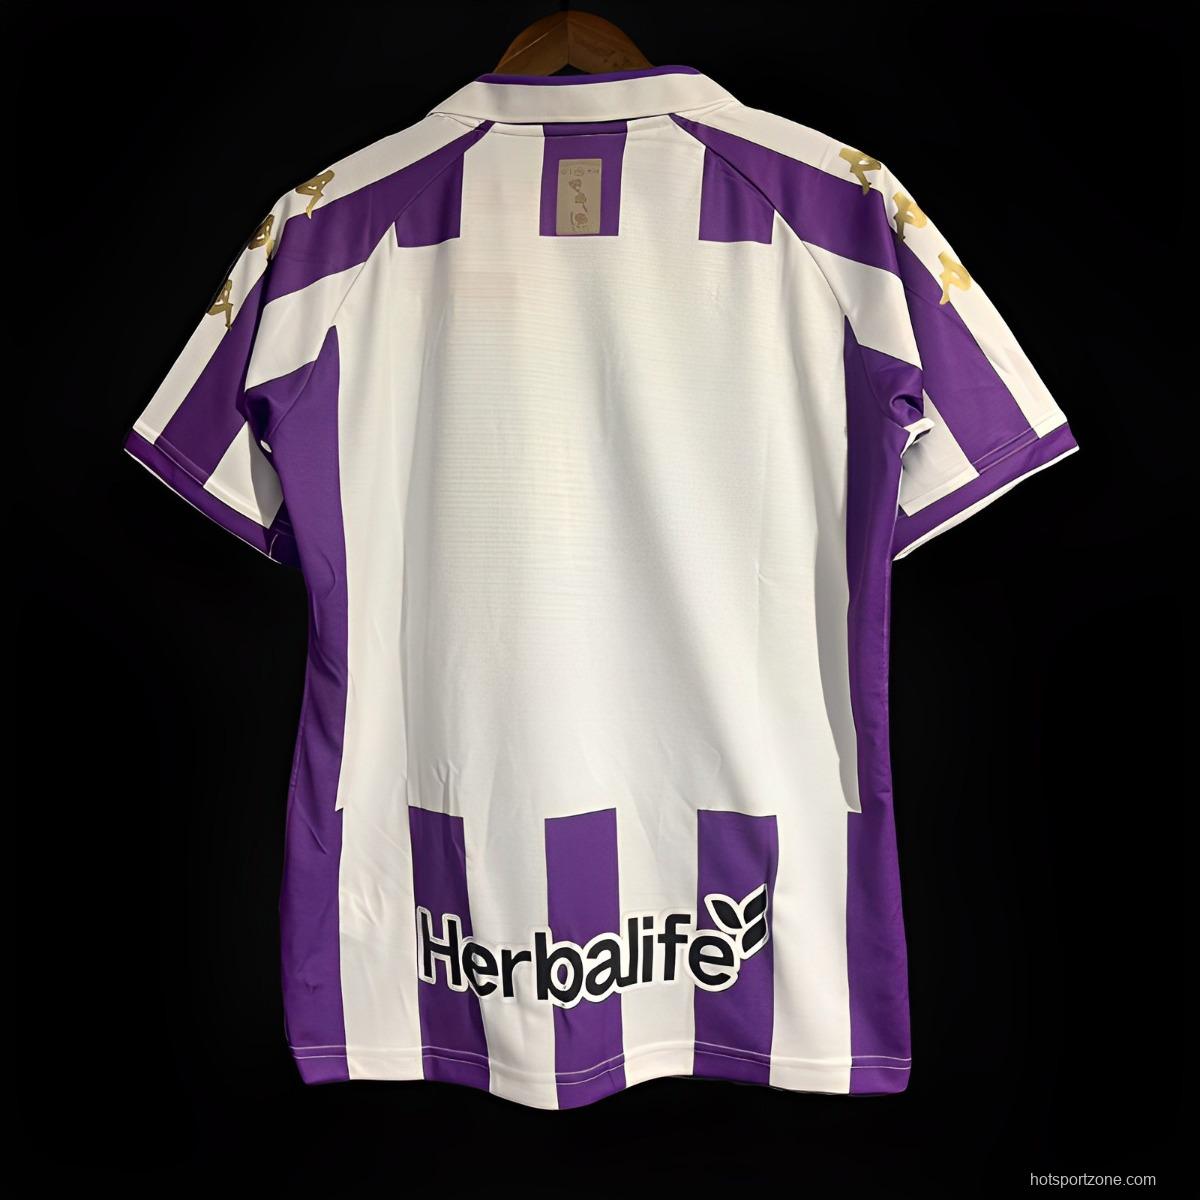 23/24 Real Valladolid Home Jersey